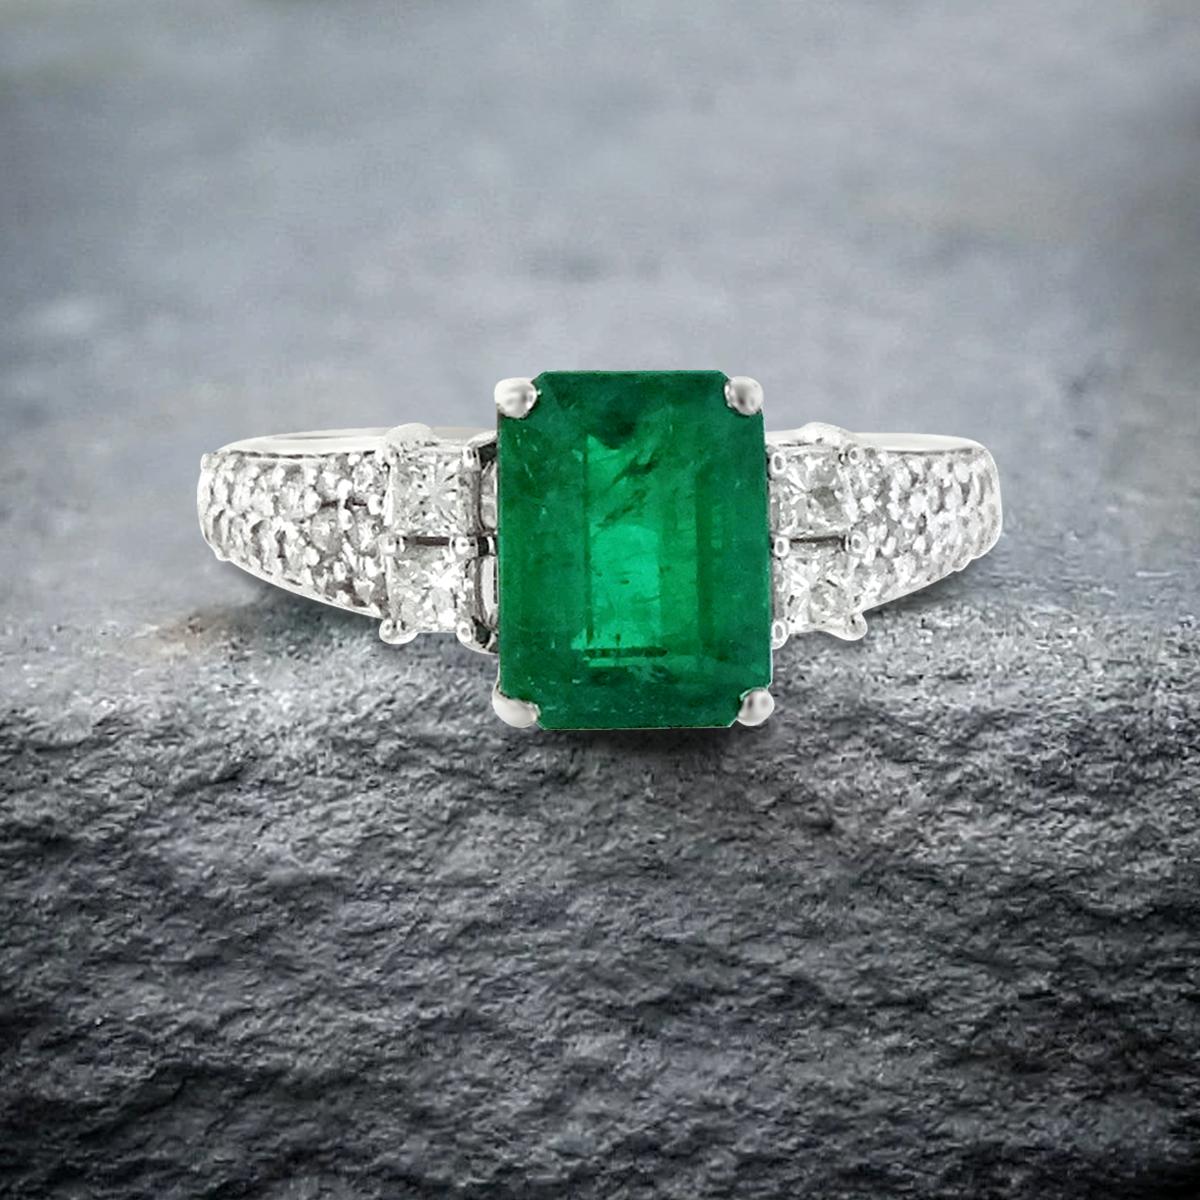 Octagon Cut 14K White Gold 1.62cts Emerald and Diamond Ring, Style# R3057